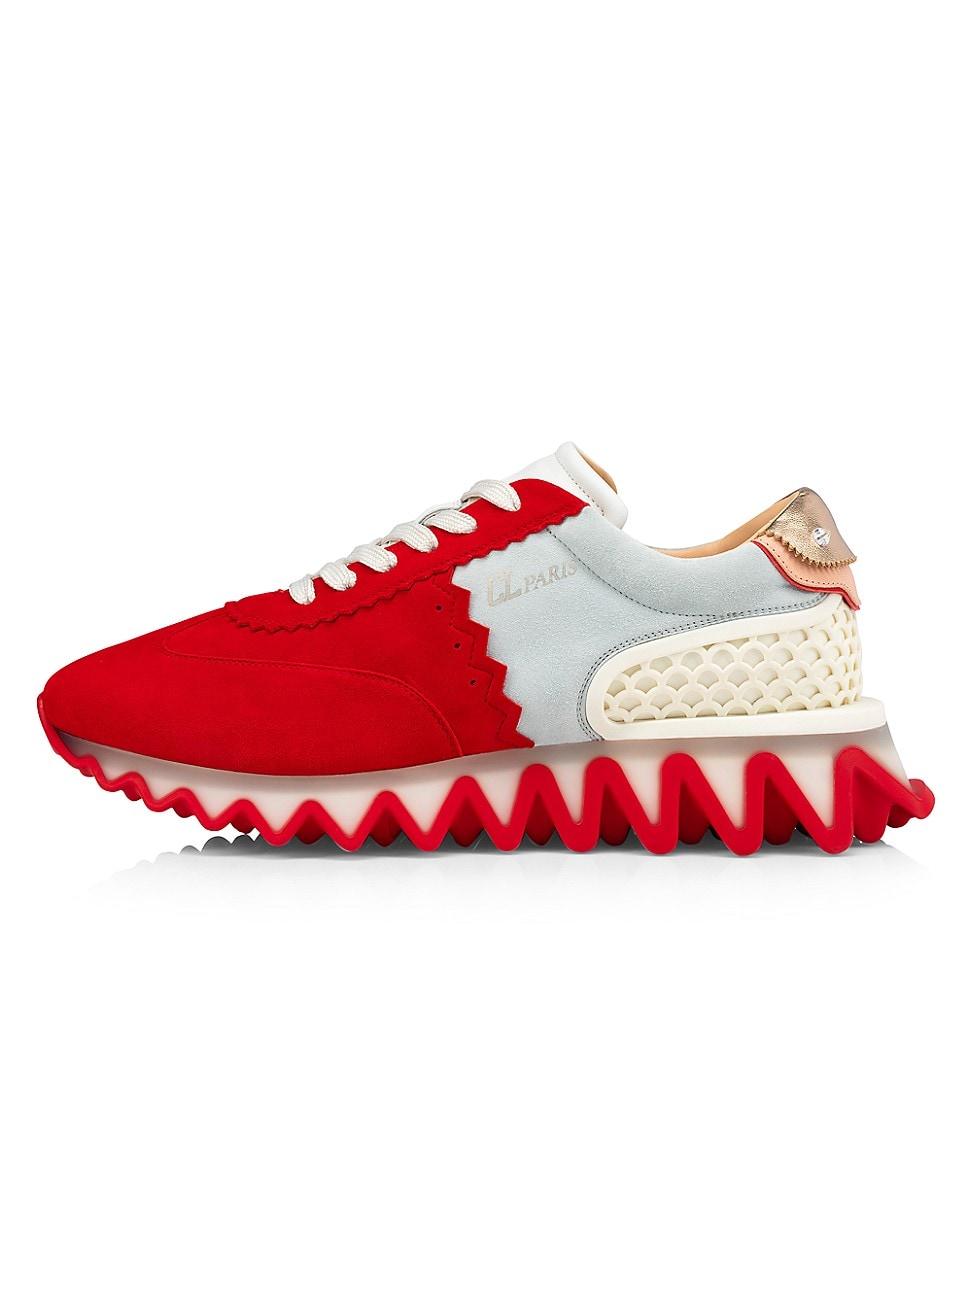 Christian Louboutin Leather Loubishark Sneakers in Red White 